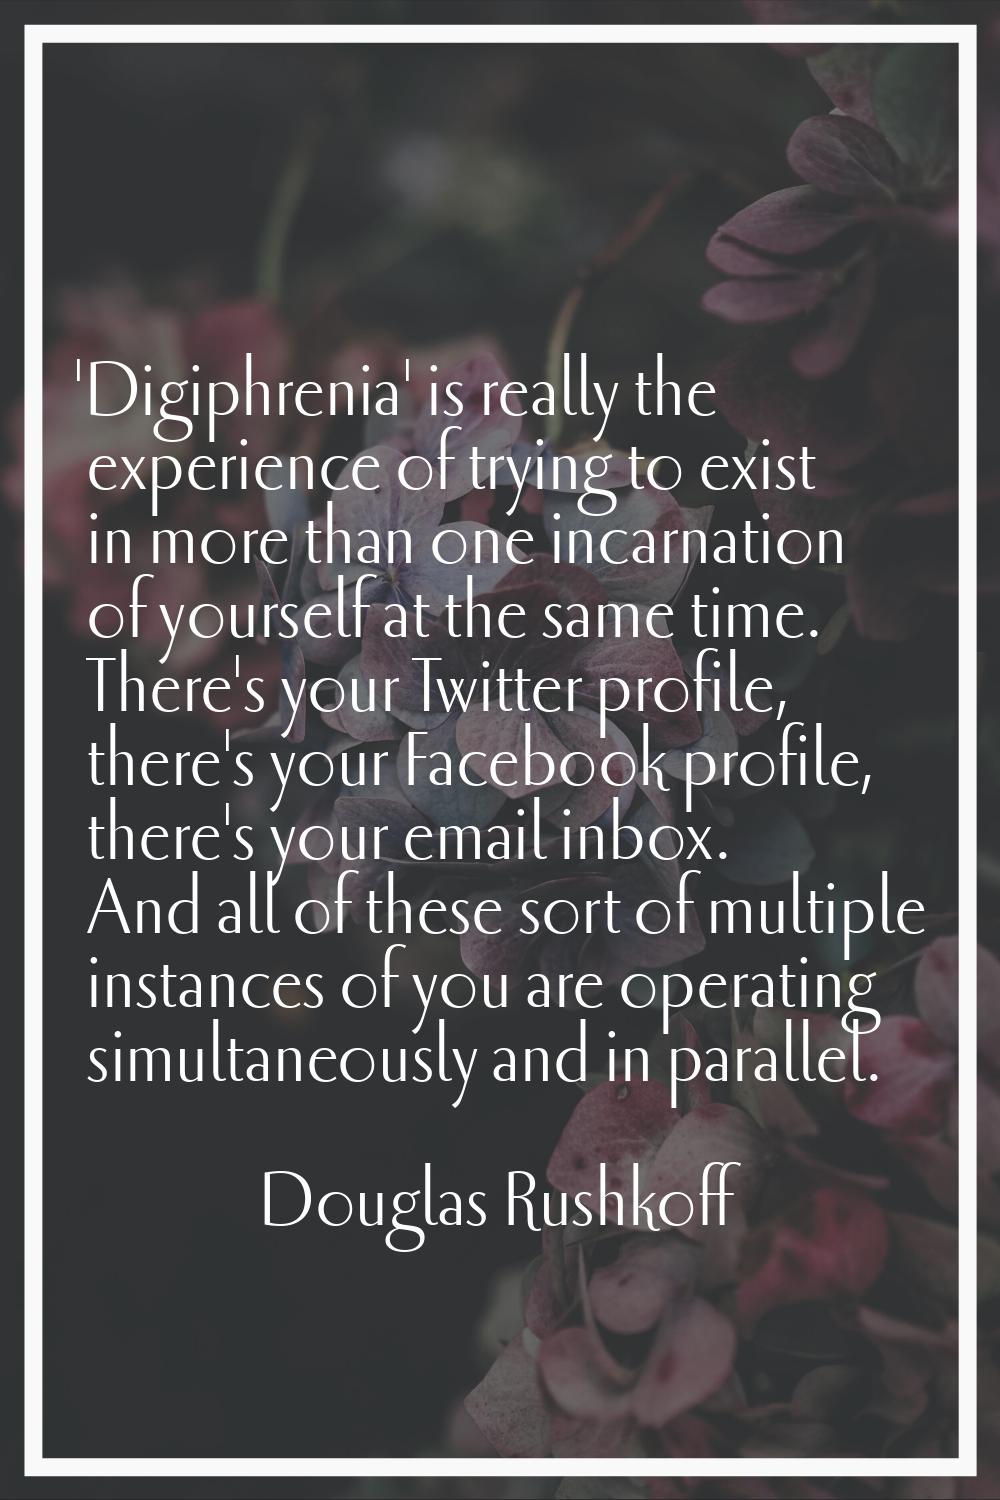 'Digiphrenia' is really the experience of trying to exist in more than one incarnation of yourself 